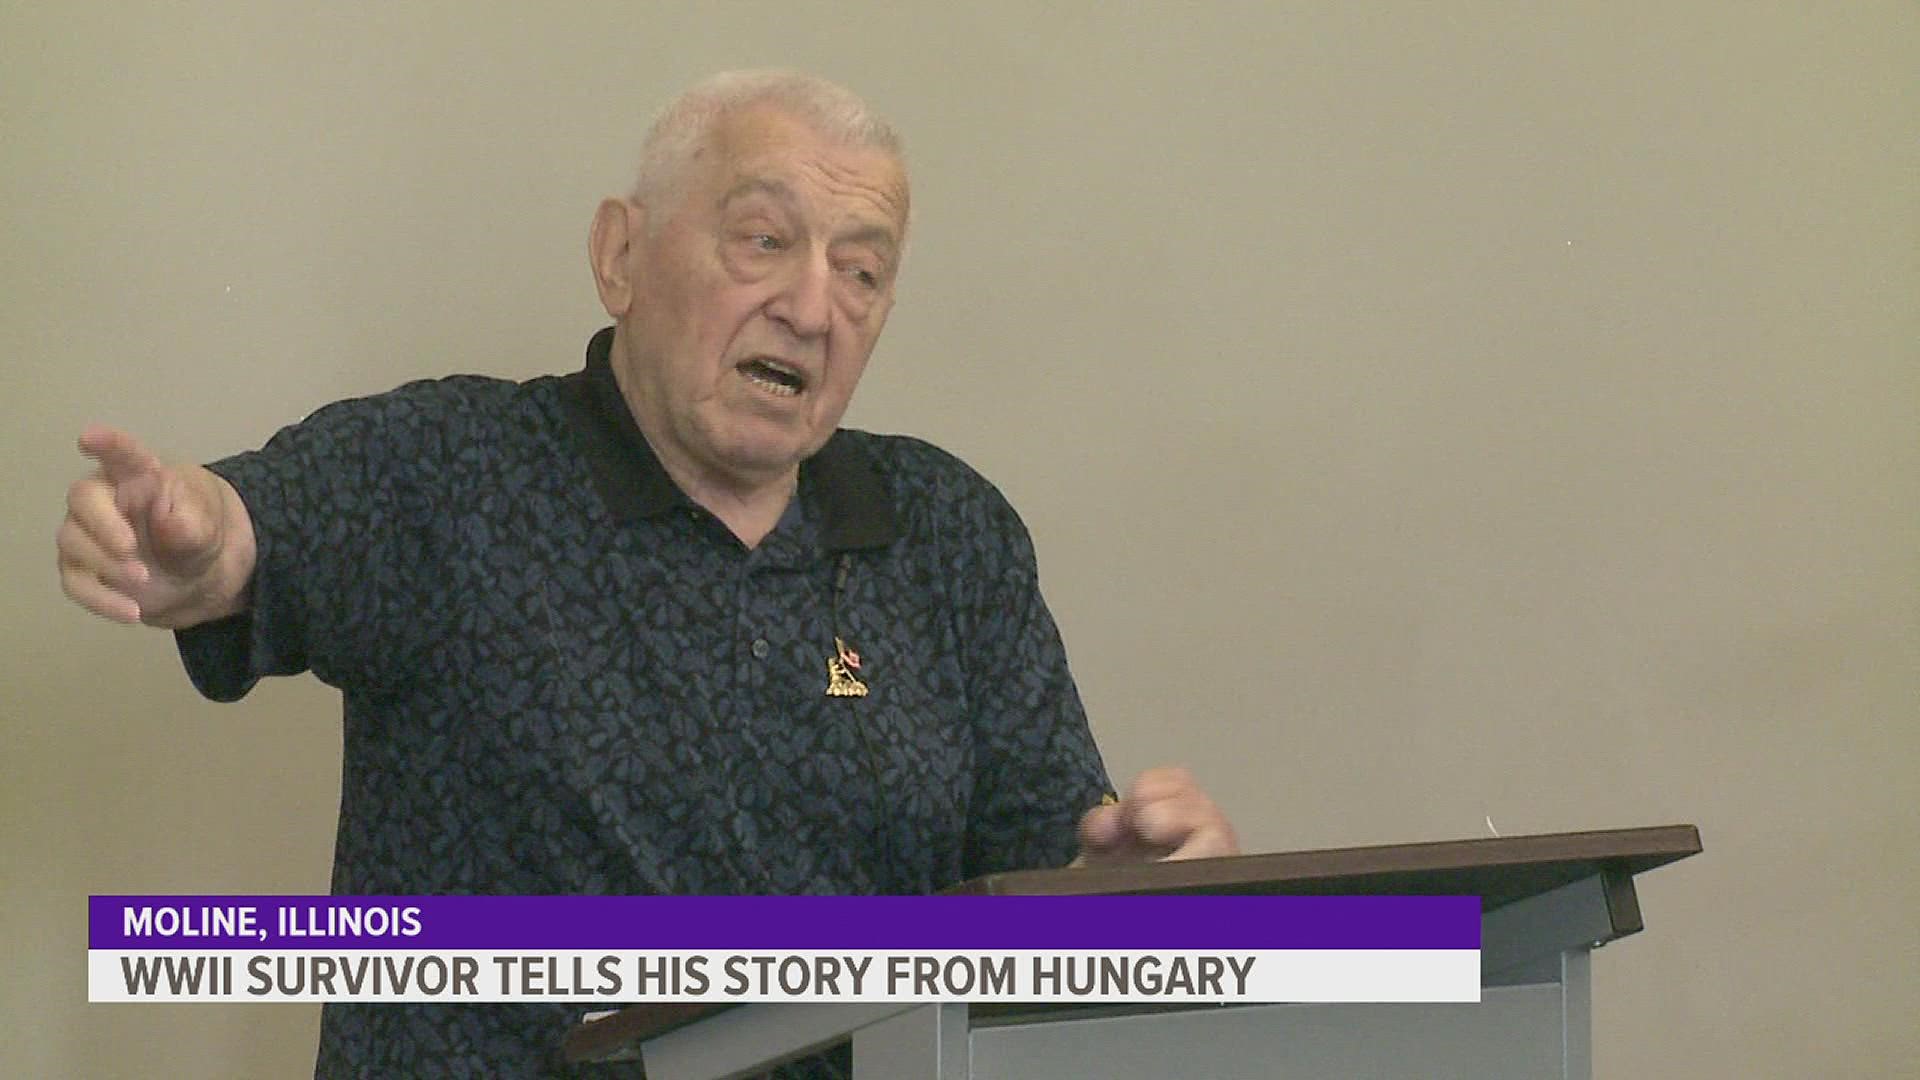 A then-7-year-old Jeno Burta helped hide a Jewish couple and their children in his family's Hungary barn during WWII.